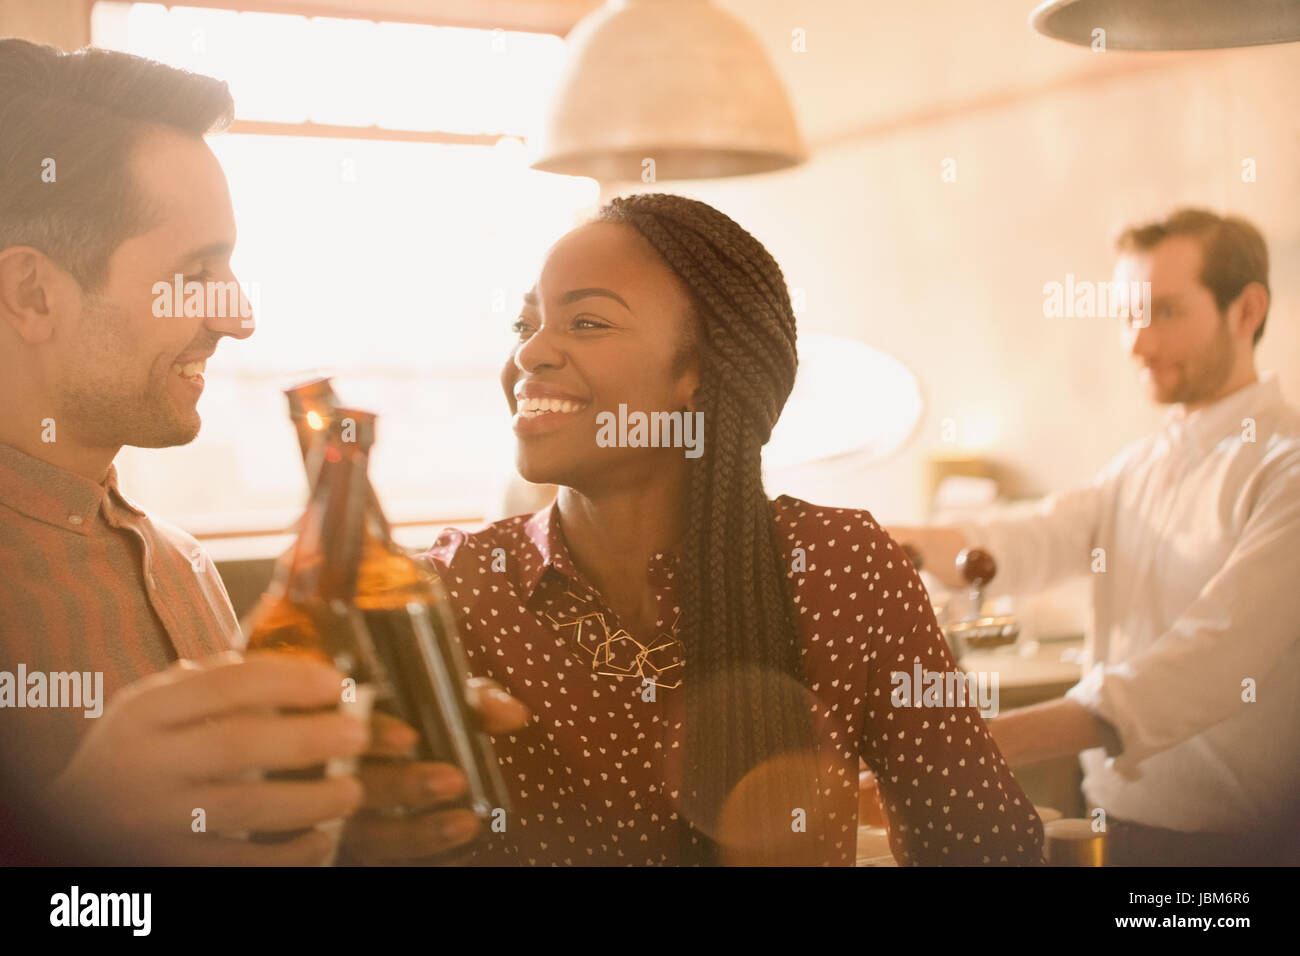 Smiling couple toasting beer bottles in bar Stock Photo